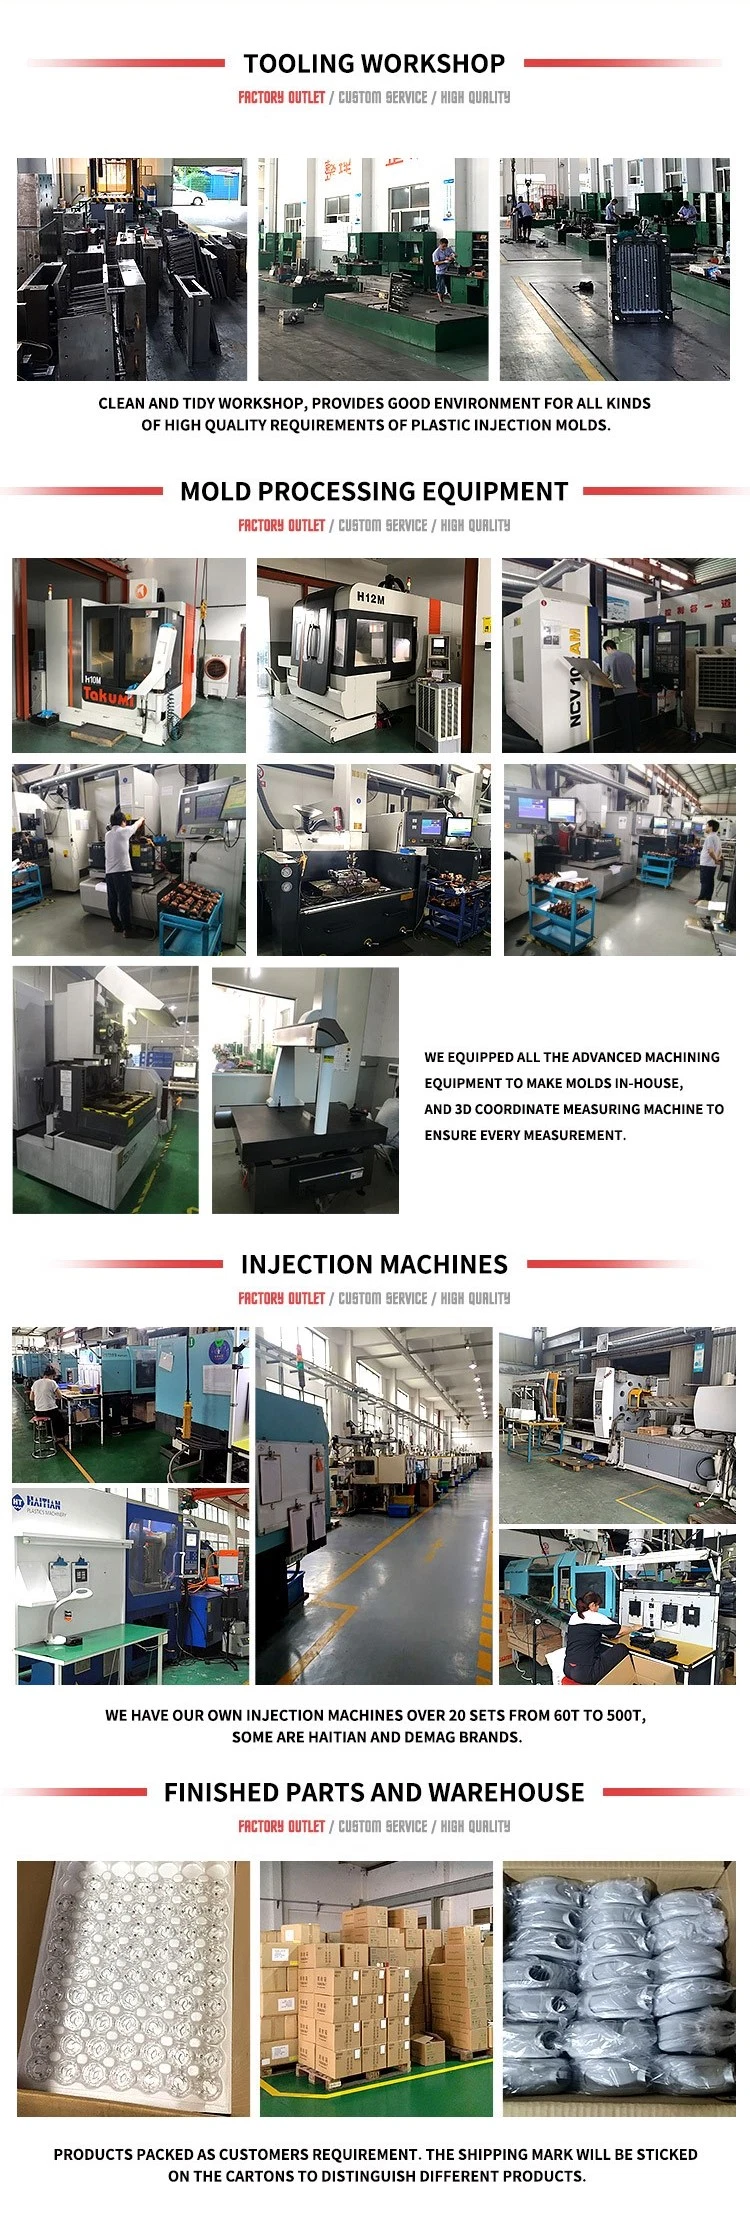 Precision Mold Plastic Injection Mould Service Tool Maker